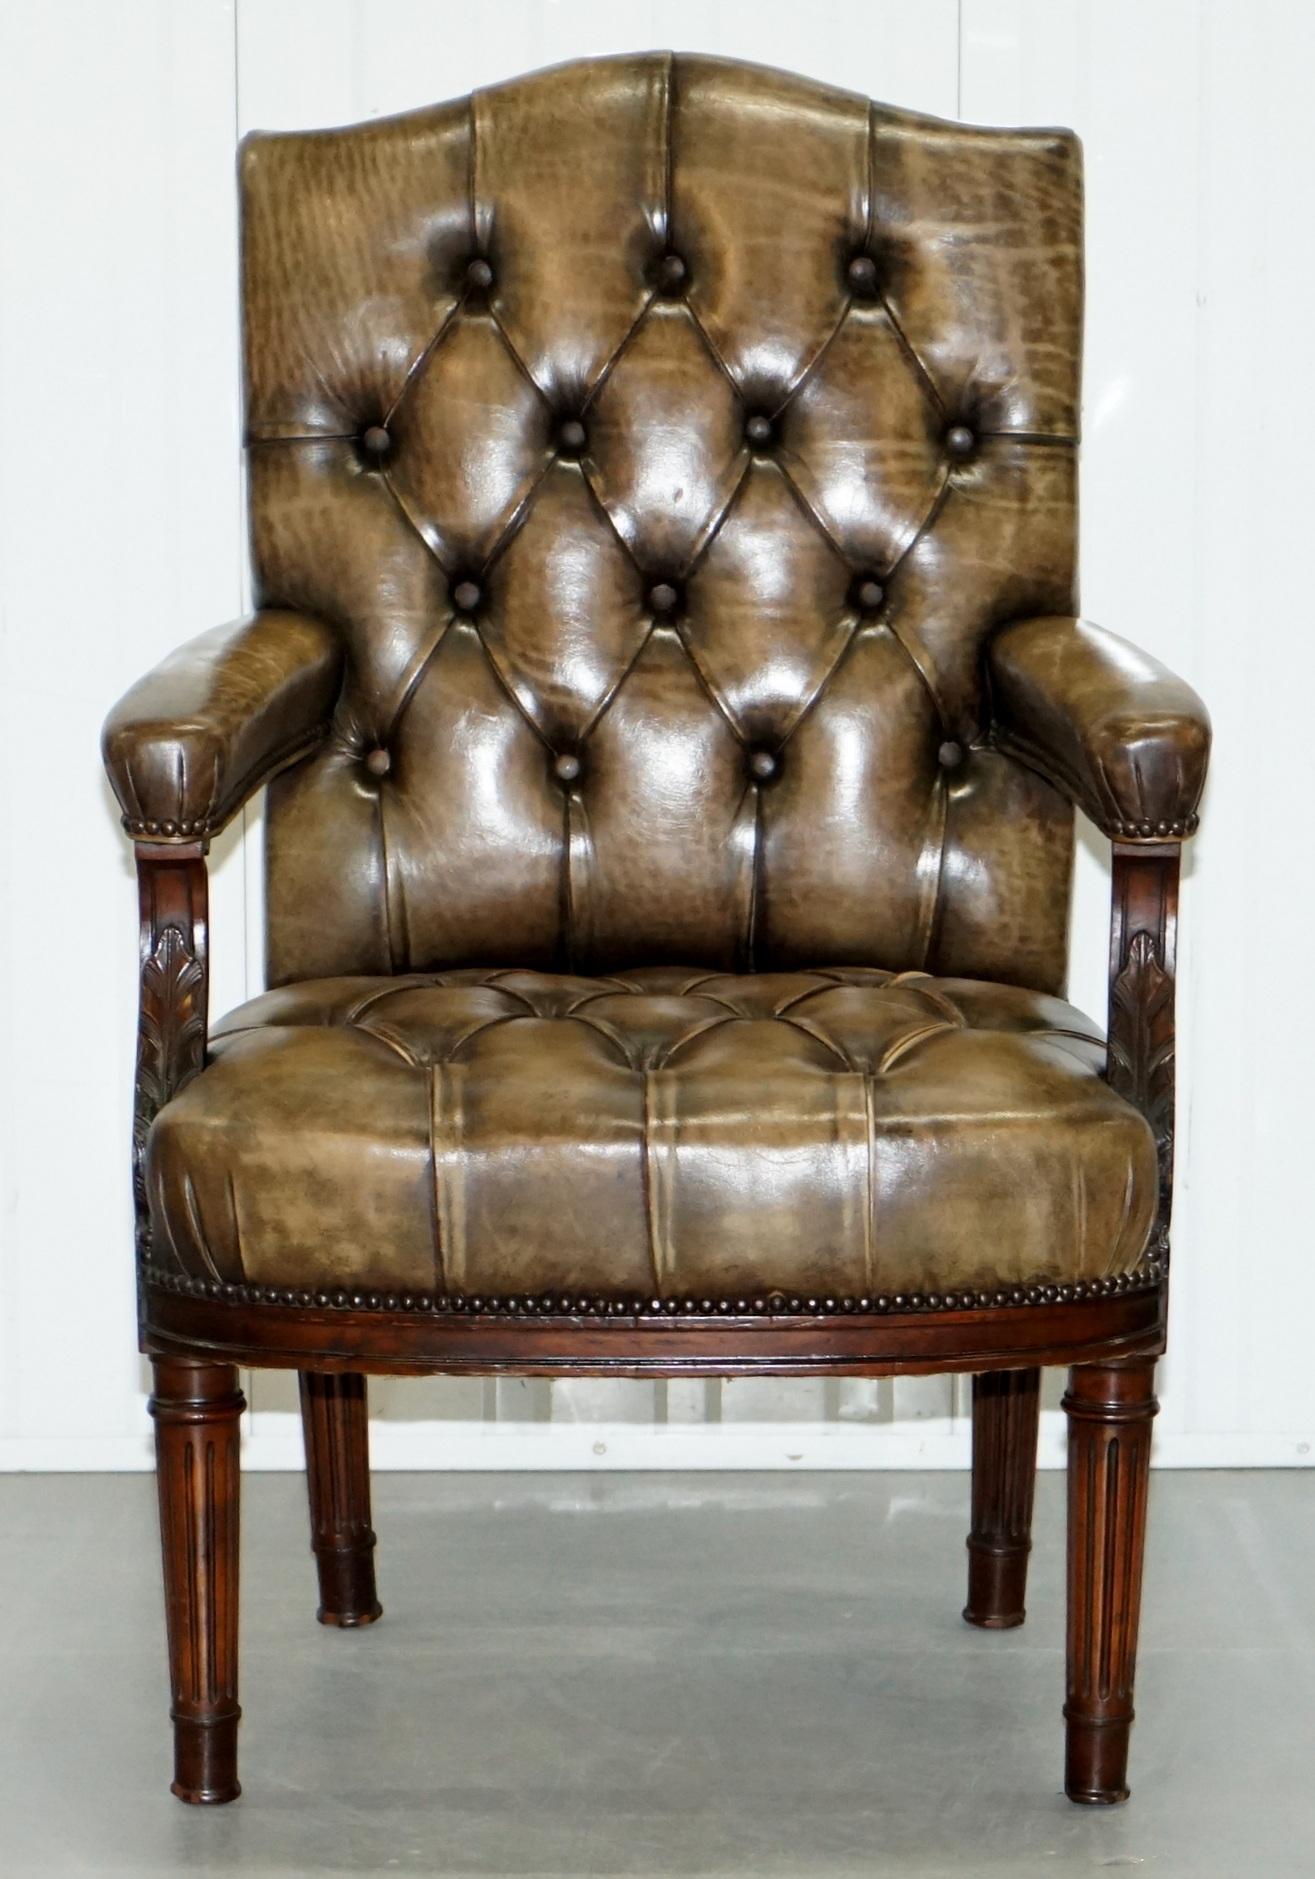 We are delighted to offer for sale this very old and really quite lovely Georgian Chesterfield Gainsborough carver armchair

A very good looking and well made piece, upholstered with the original natural patina leather hide, hand antique studded